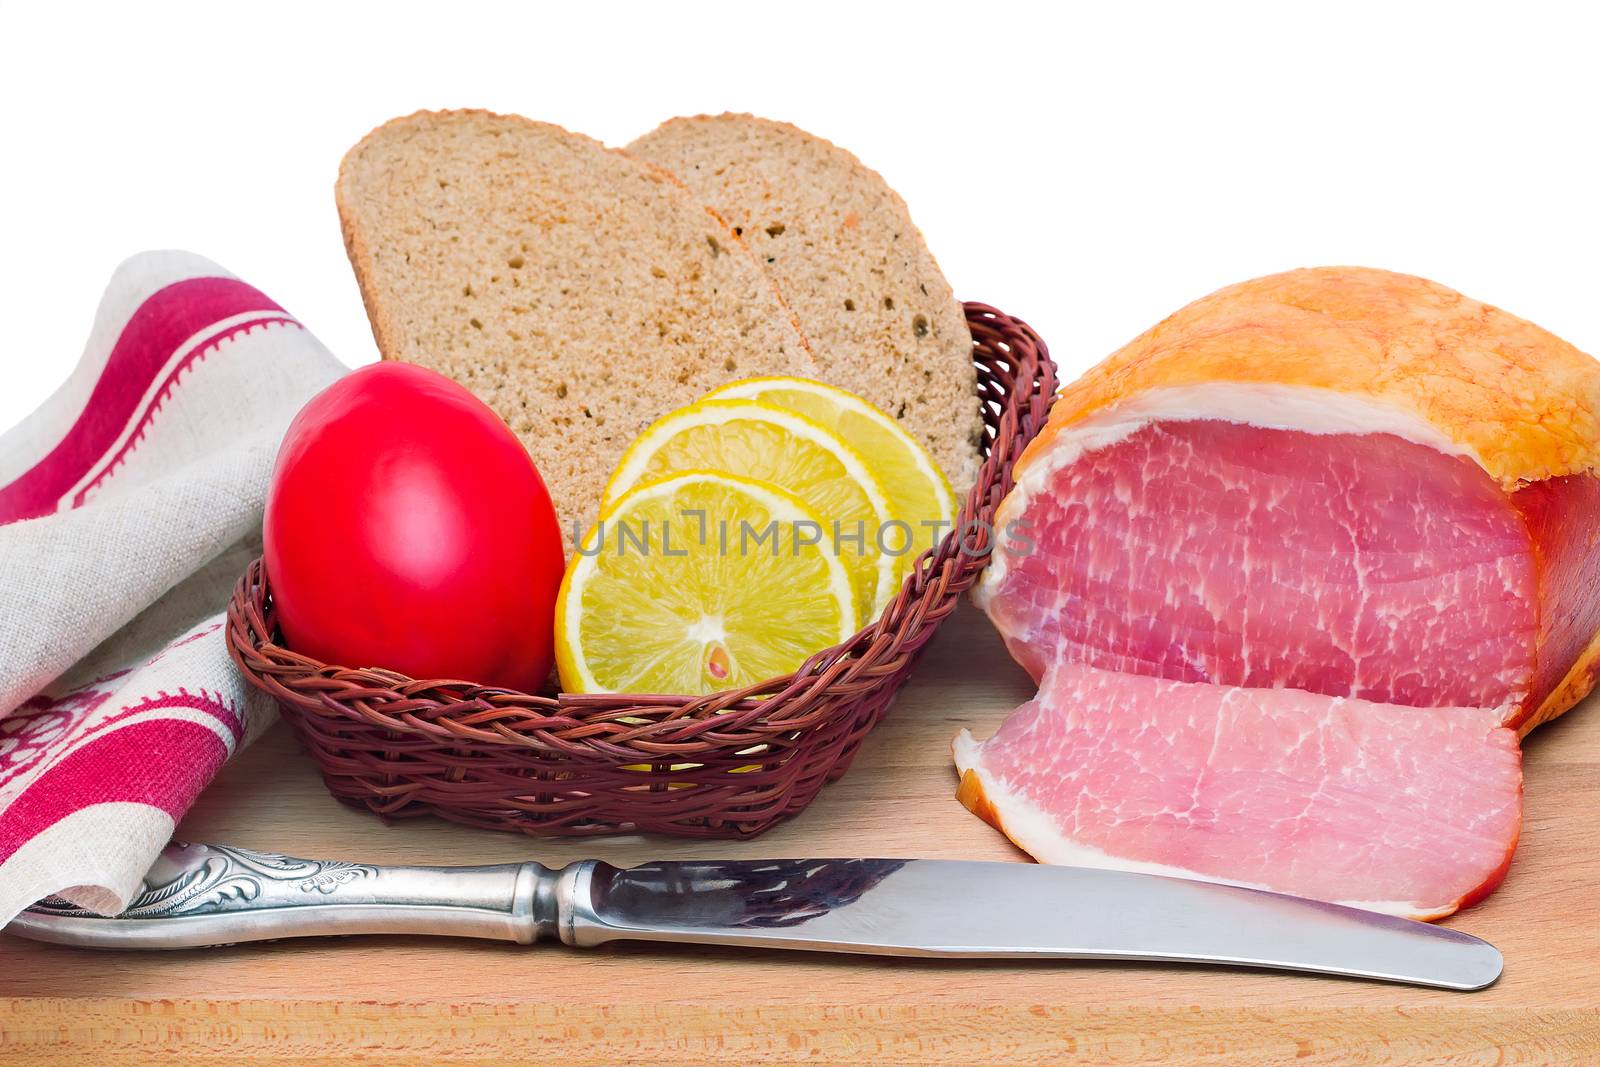 On a cutting Board is ham, bread, lemon and tomato. Presented on a white background.